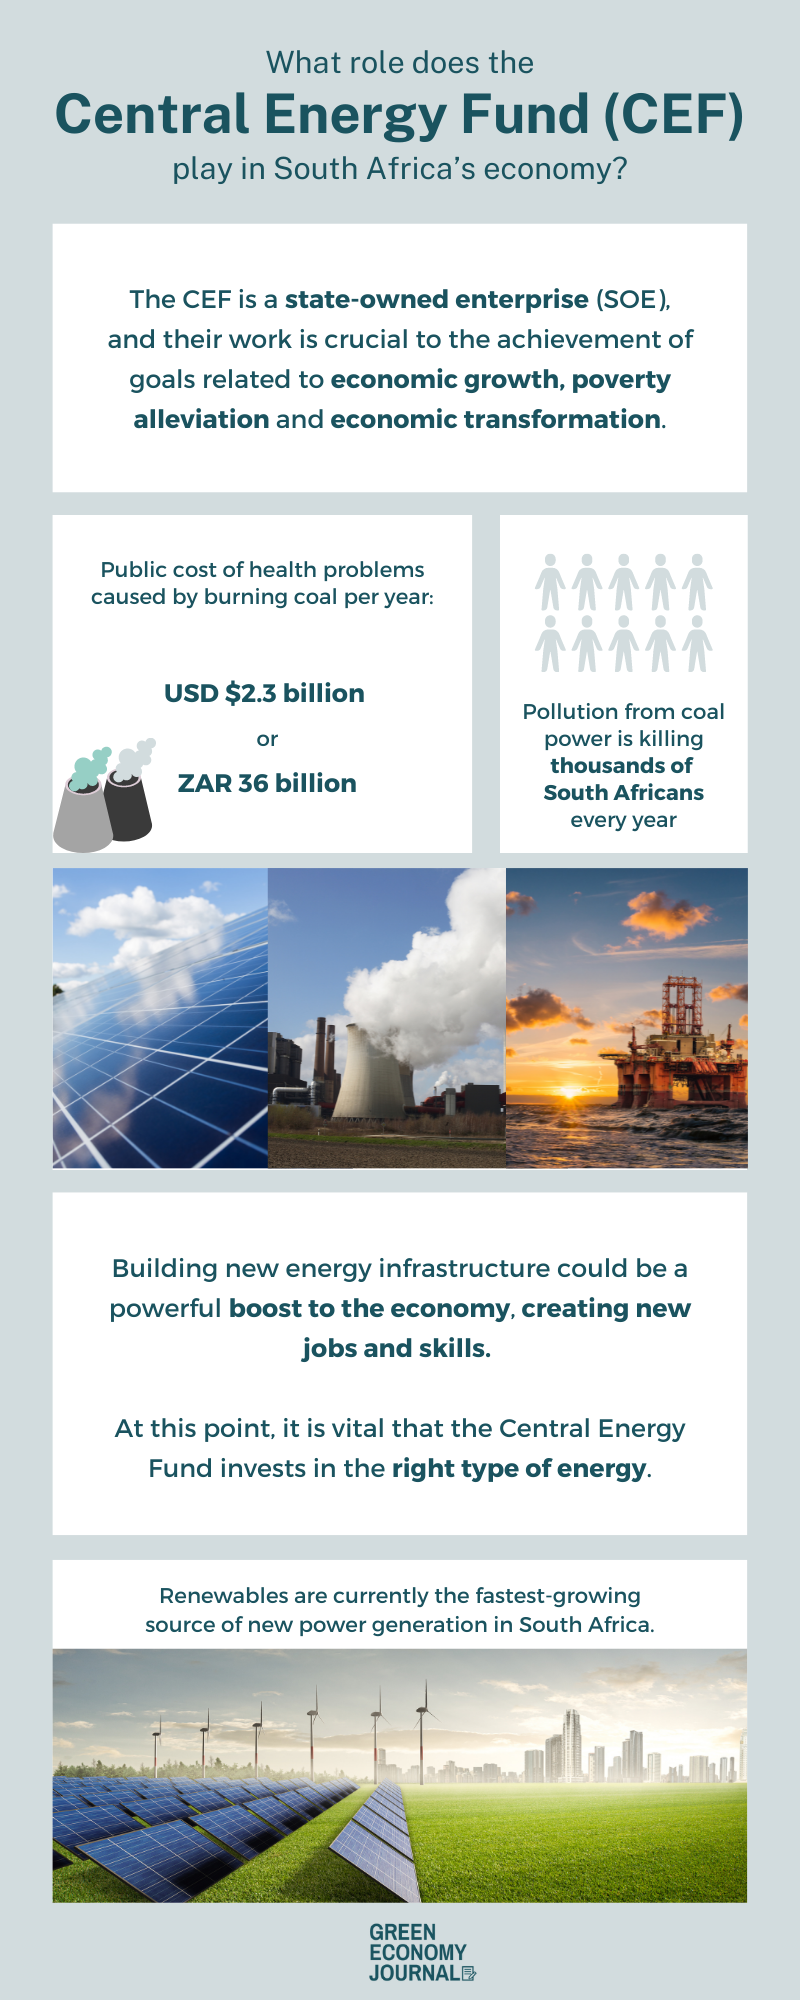 What role does the Central Energy Fund (CEF) play in South Africa's economy?